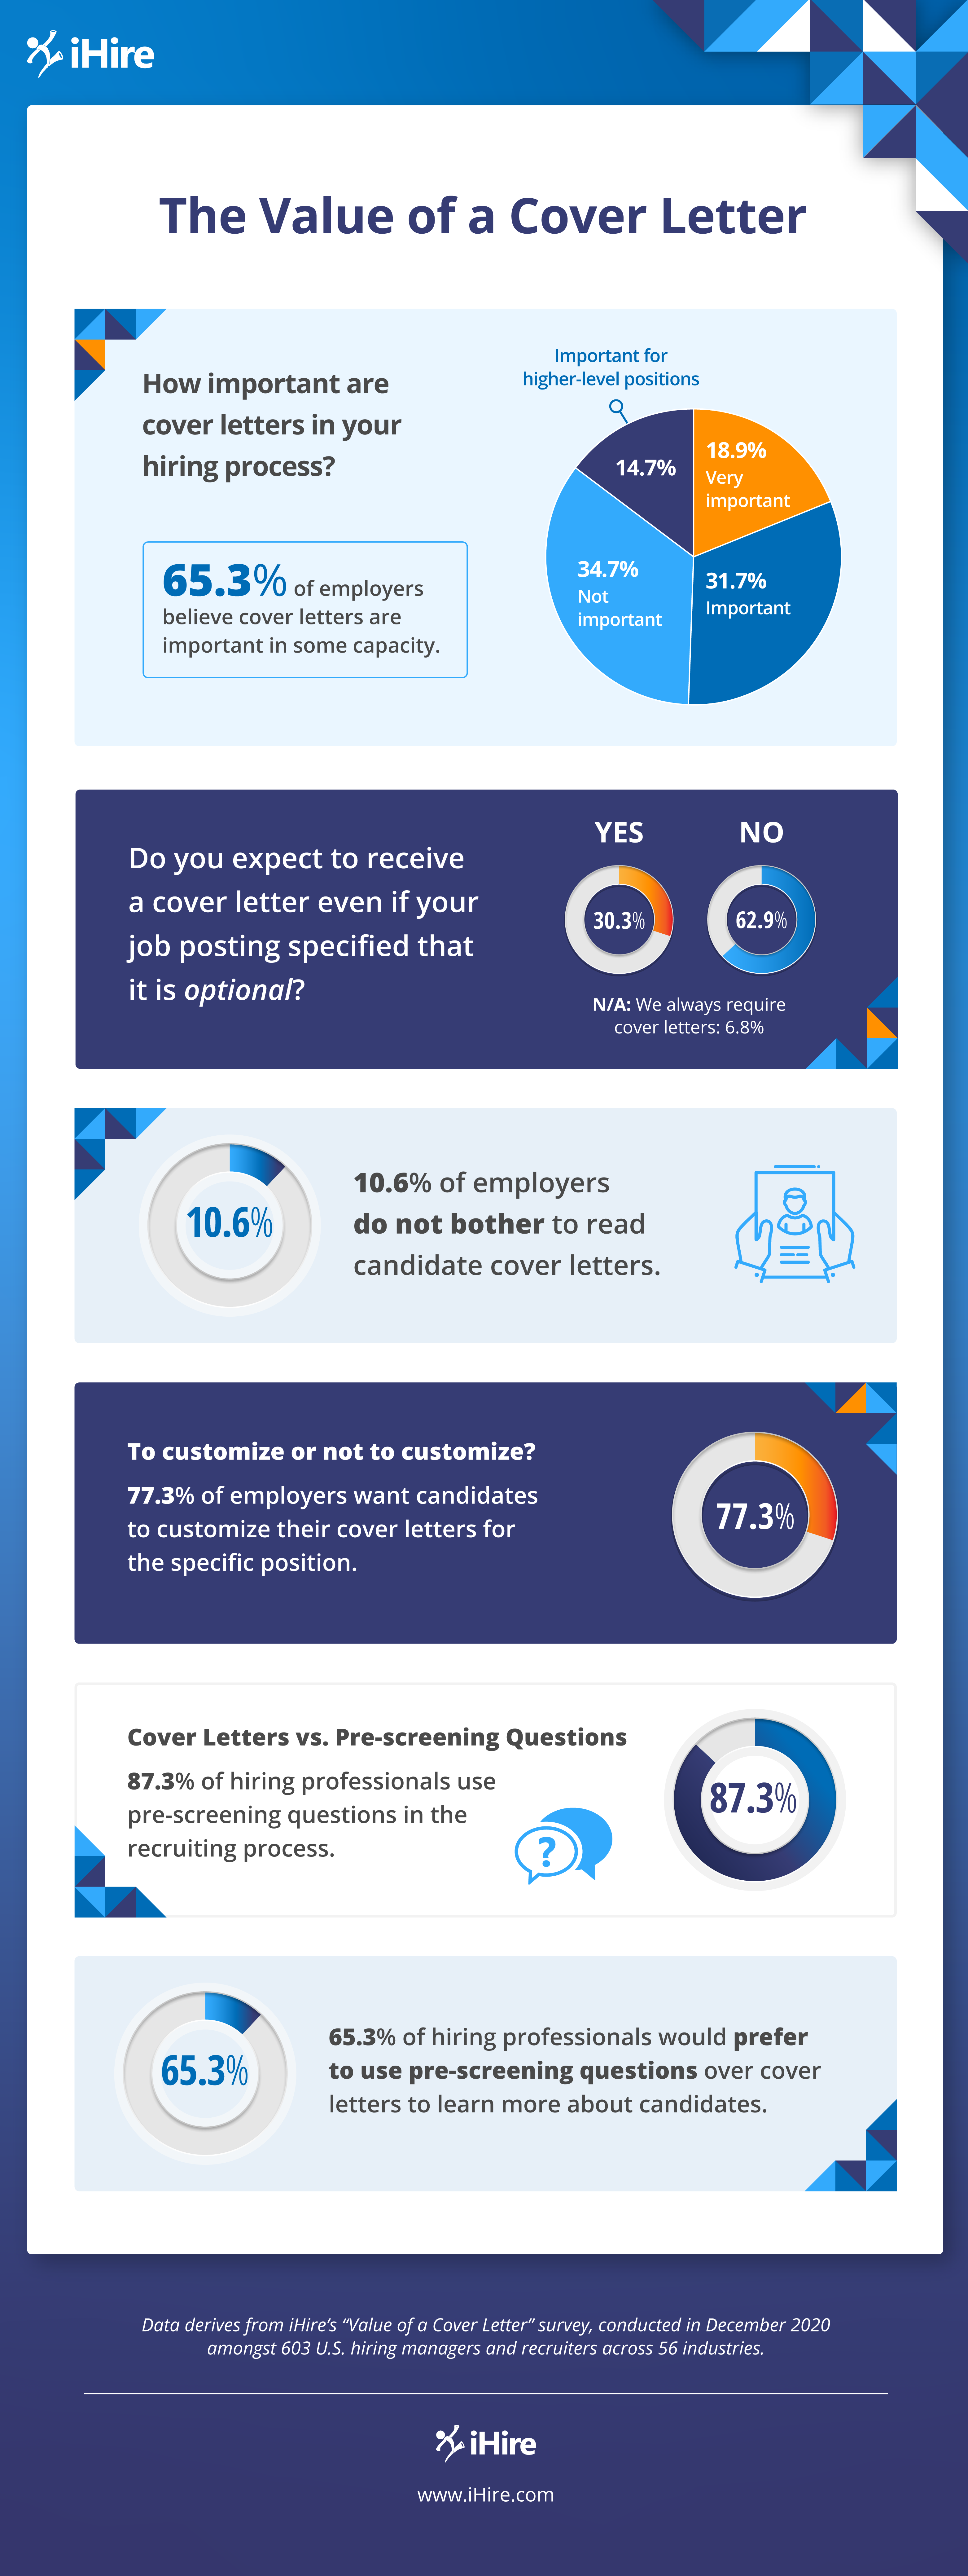 The value of a cover letter survey results infographic